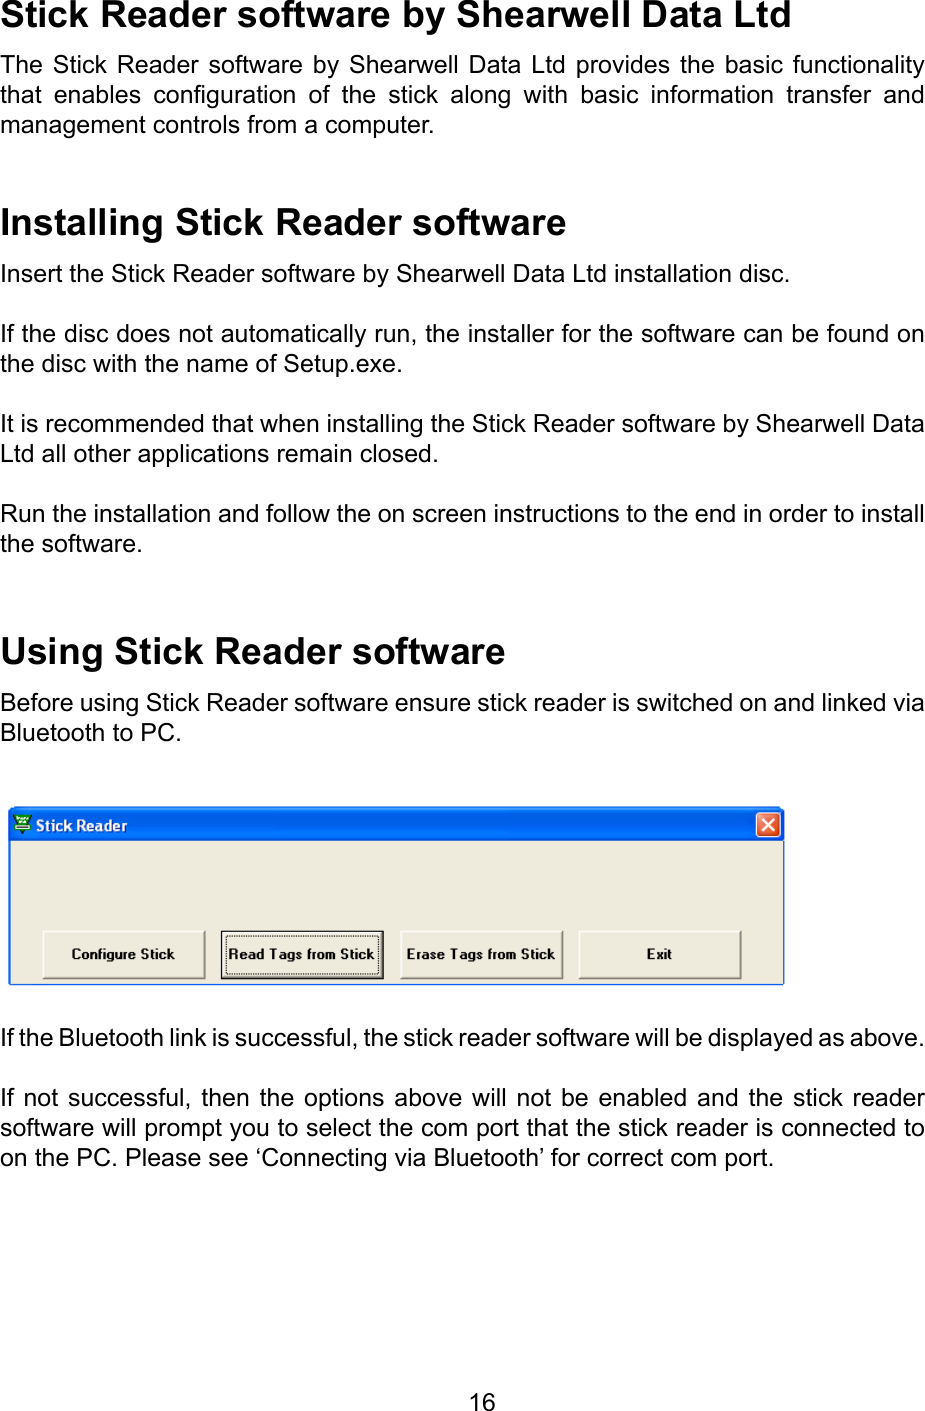         16StickReadersoftwarebyShearwellDataLtdThe Stick  Reader software  by Shearwell  Data  Ltd provides  the basic  functionality that  enables  conguration  of  the  stick  along  with  basic  information  transfer  and management controls from a computer.InstallingStickReadersoftwareInsert the Stick Reader software by Shearwell Data Ltd installation disc.If the disc does not automatically run, the installer for the software can be found on the disc with the name of Setup.exe.It is recommended that when installing the Stick Reader software by Shearwell Data Ltd all other applications remain closed.Run the installation and follow the on screen instructions to the end in order to install the software.UsingStickReadersoftwareBefore using Stick Reader software ensure stick reader is switched on and linked via Bluetooth to PC.If the Bluetooth link is successful, the stick reader software will be displayed as above. If not successful,  then the options  above  will not be  enabled  and the stick  reader software will prompt you to select the com port that the stick reader is connected to on the PC. Please see ‘Connecting via Bluetooth’ for correct com port.